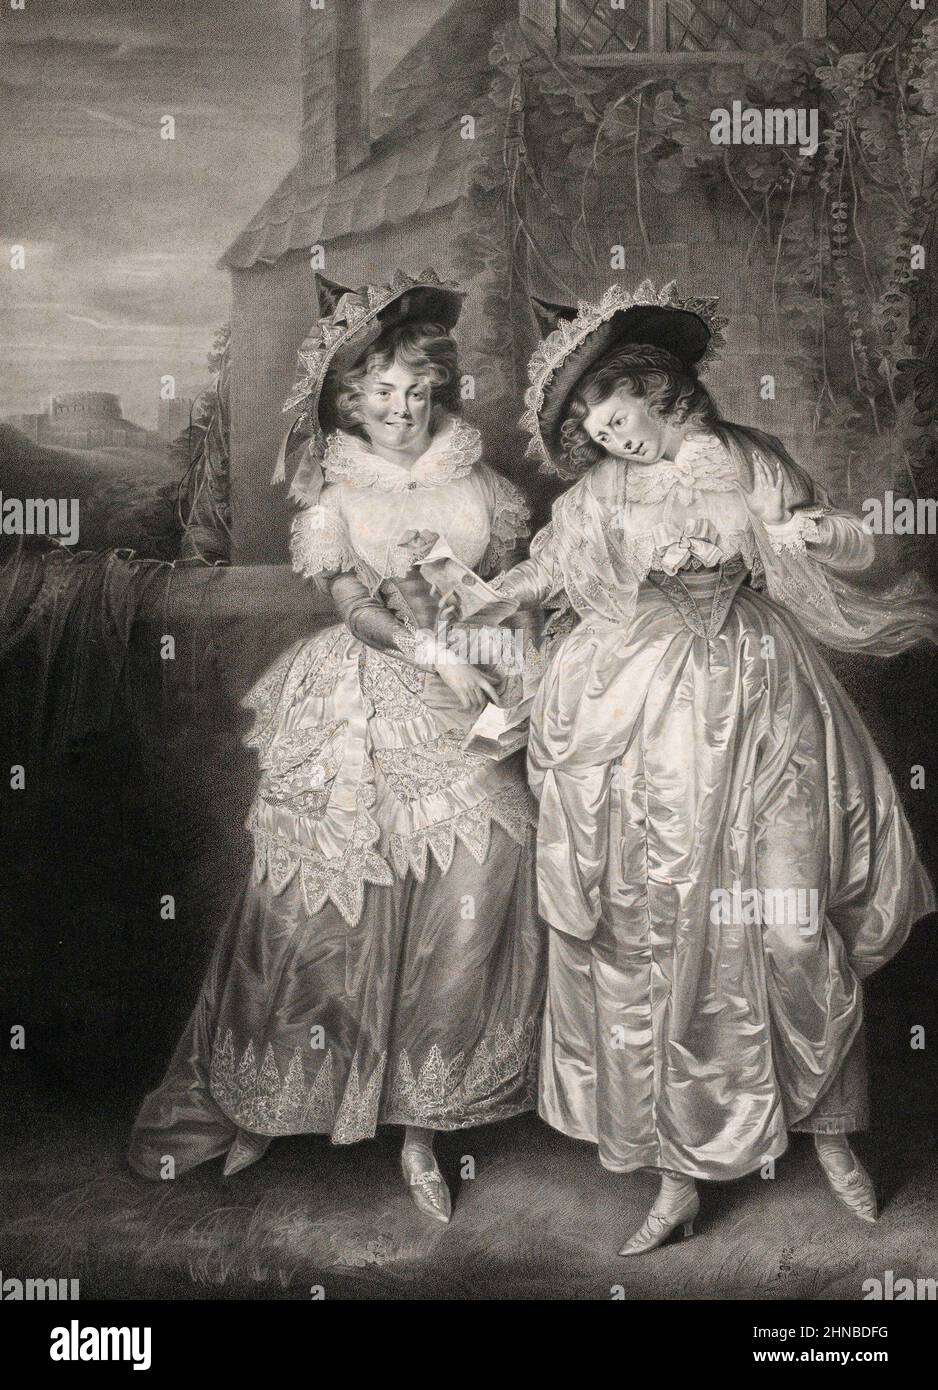 Mrs. Ford & Mrs. Page in the Characters of Shakespeare's The Merry Wives of Windsor Act 3 Scene 1 Stock Photo